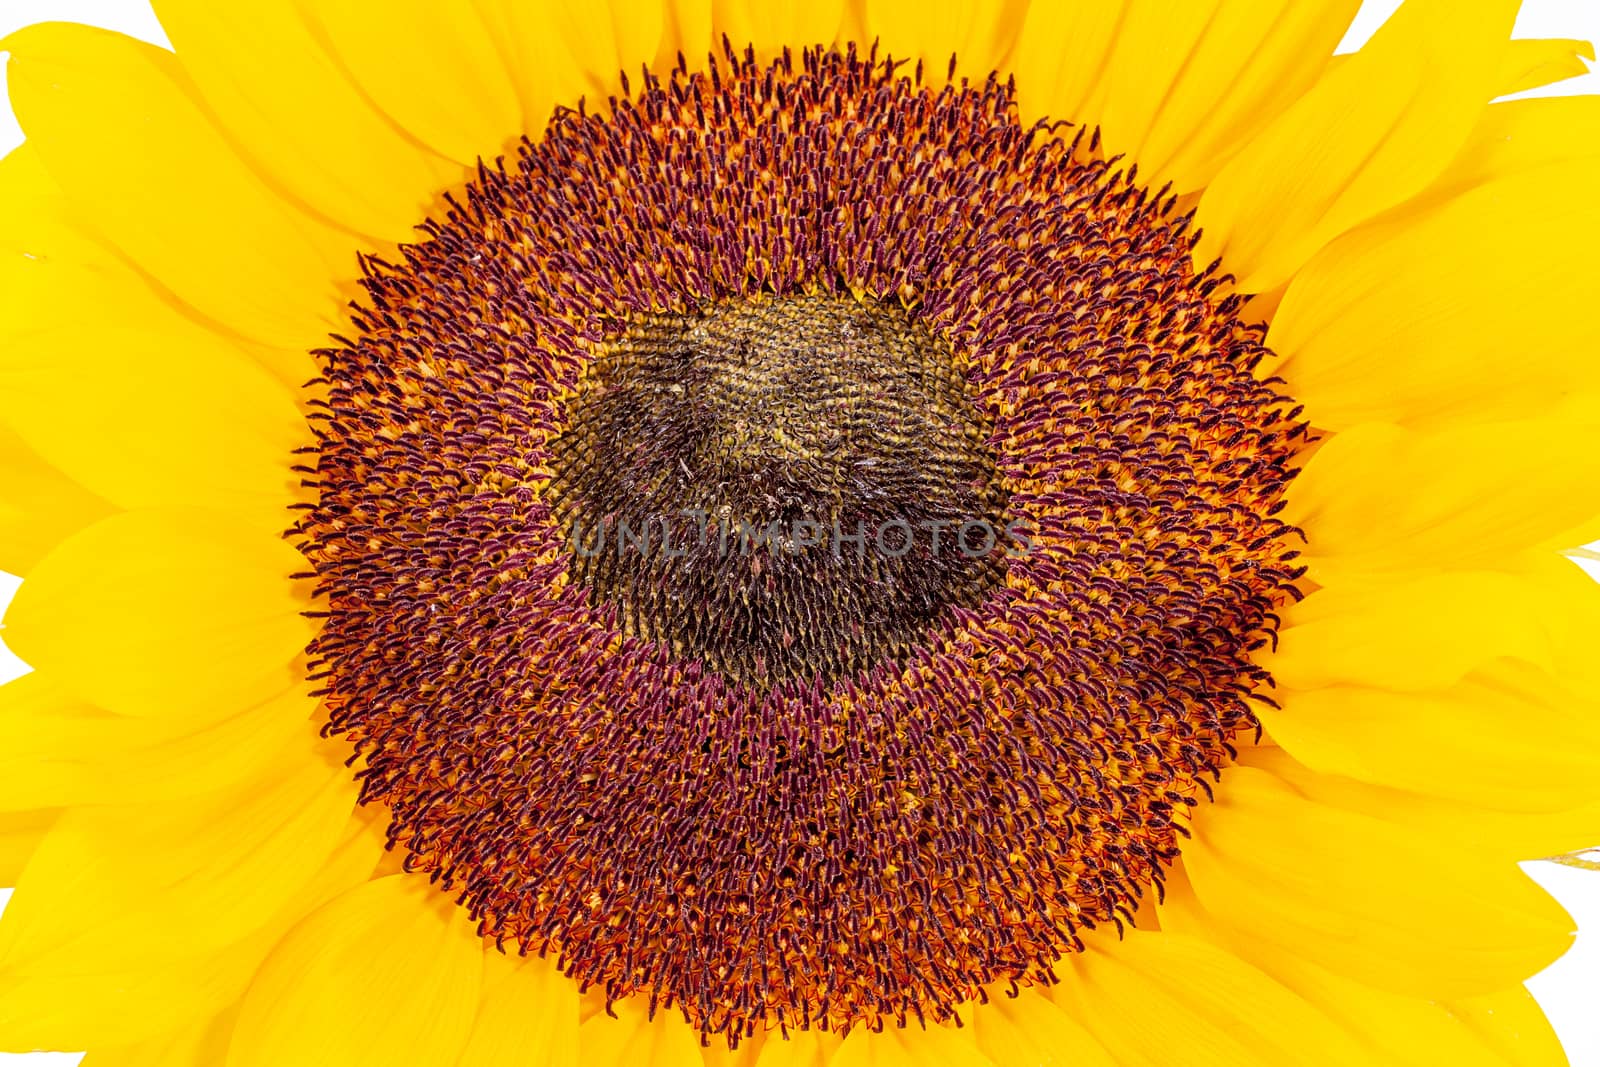 blooming sunflower on white background, close up by mychadre77